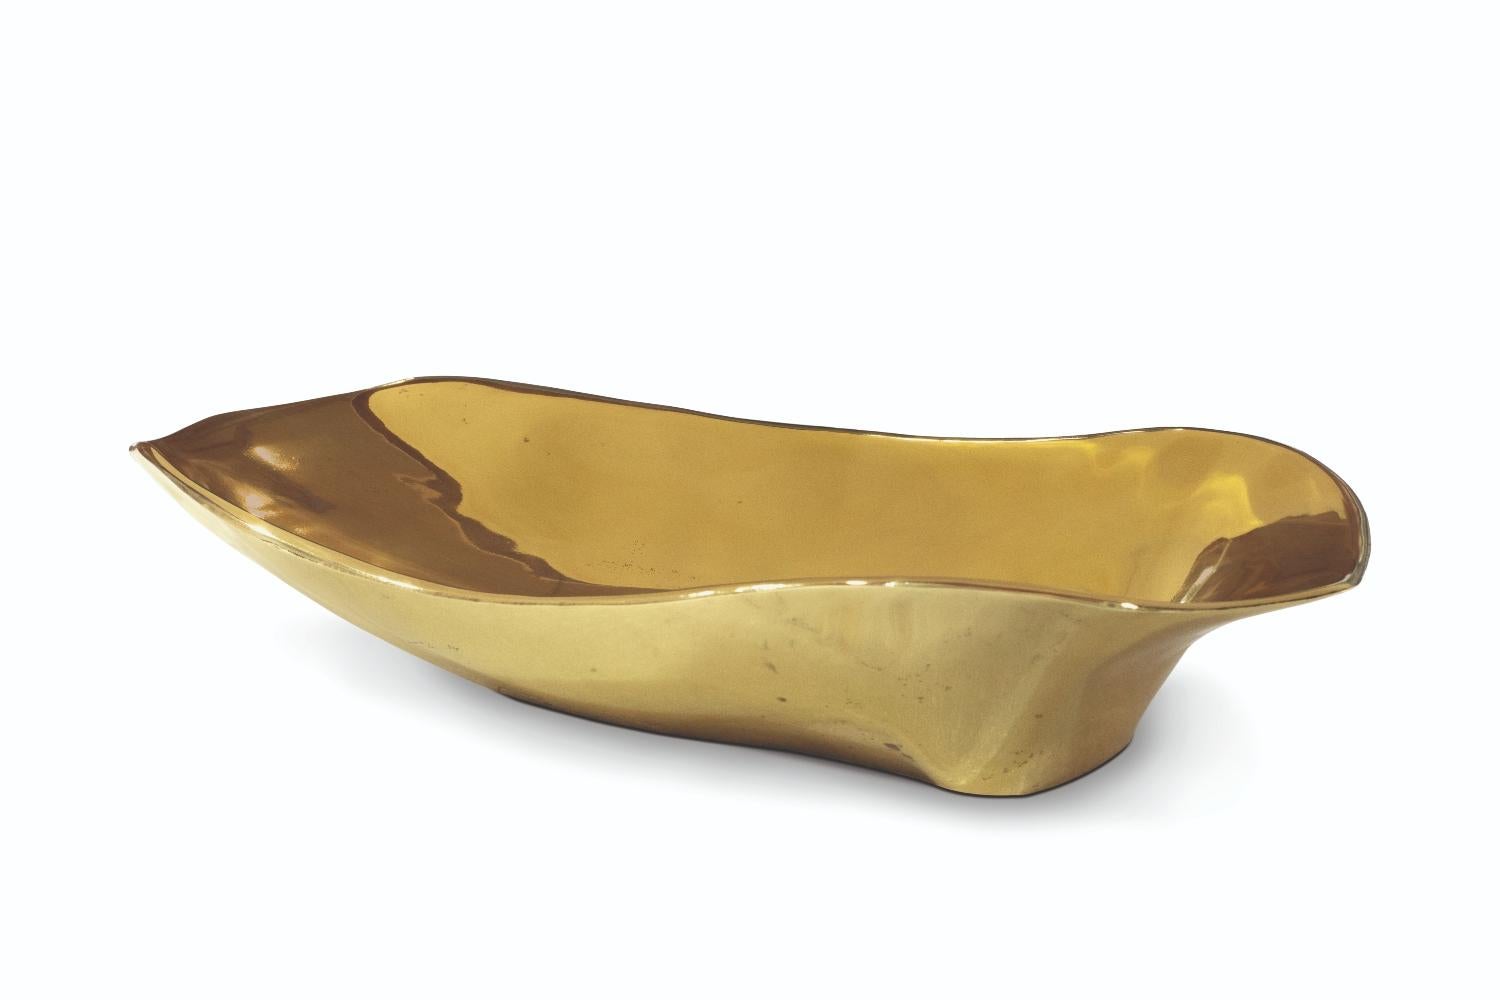 Modern Lapiaz in casted brass vessel sink by Maison Valentina

A Modern Lapiaz in in casted brass vessel sink by Maison Valentina, a vessel sink made of casted brass can be gold, nickel and copper-plated or even lacquered in any color. This